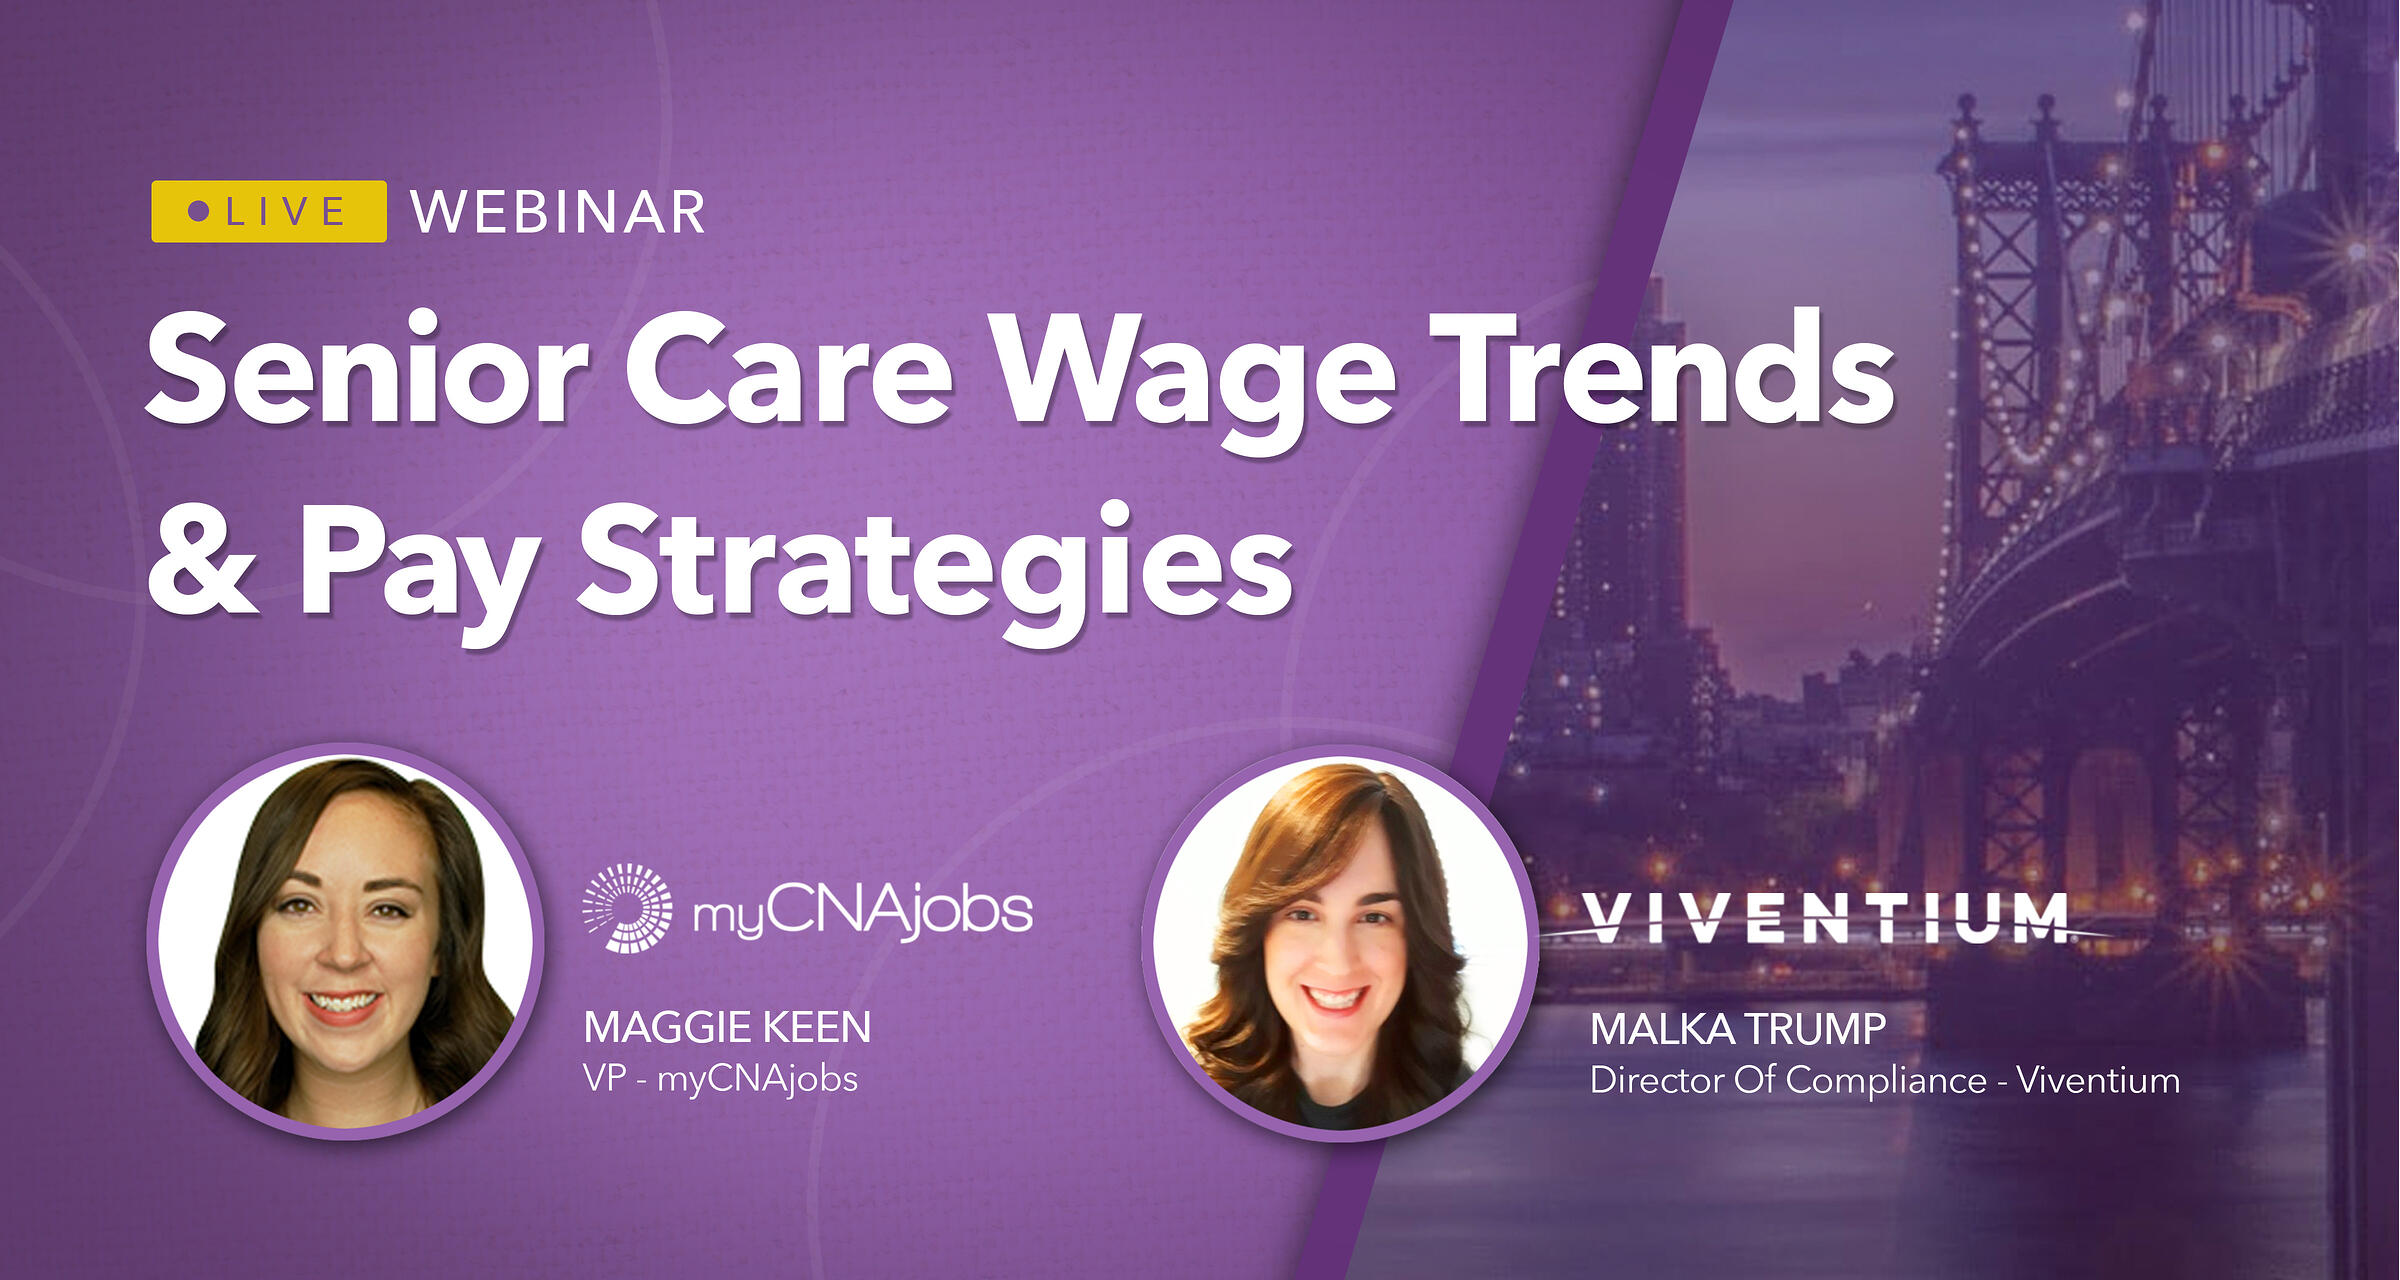 Senior Care Wage Trends & Pay Strategies